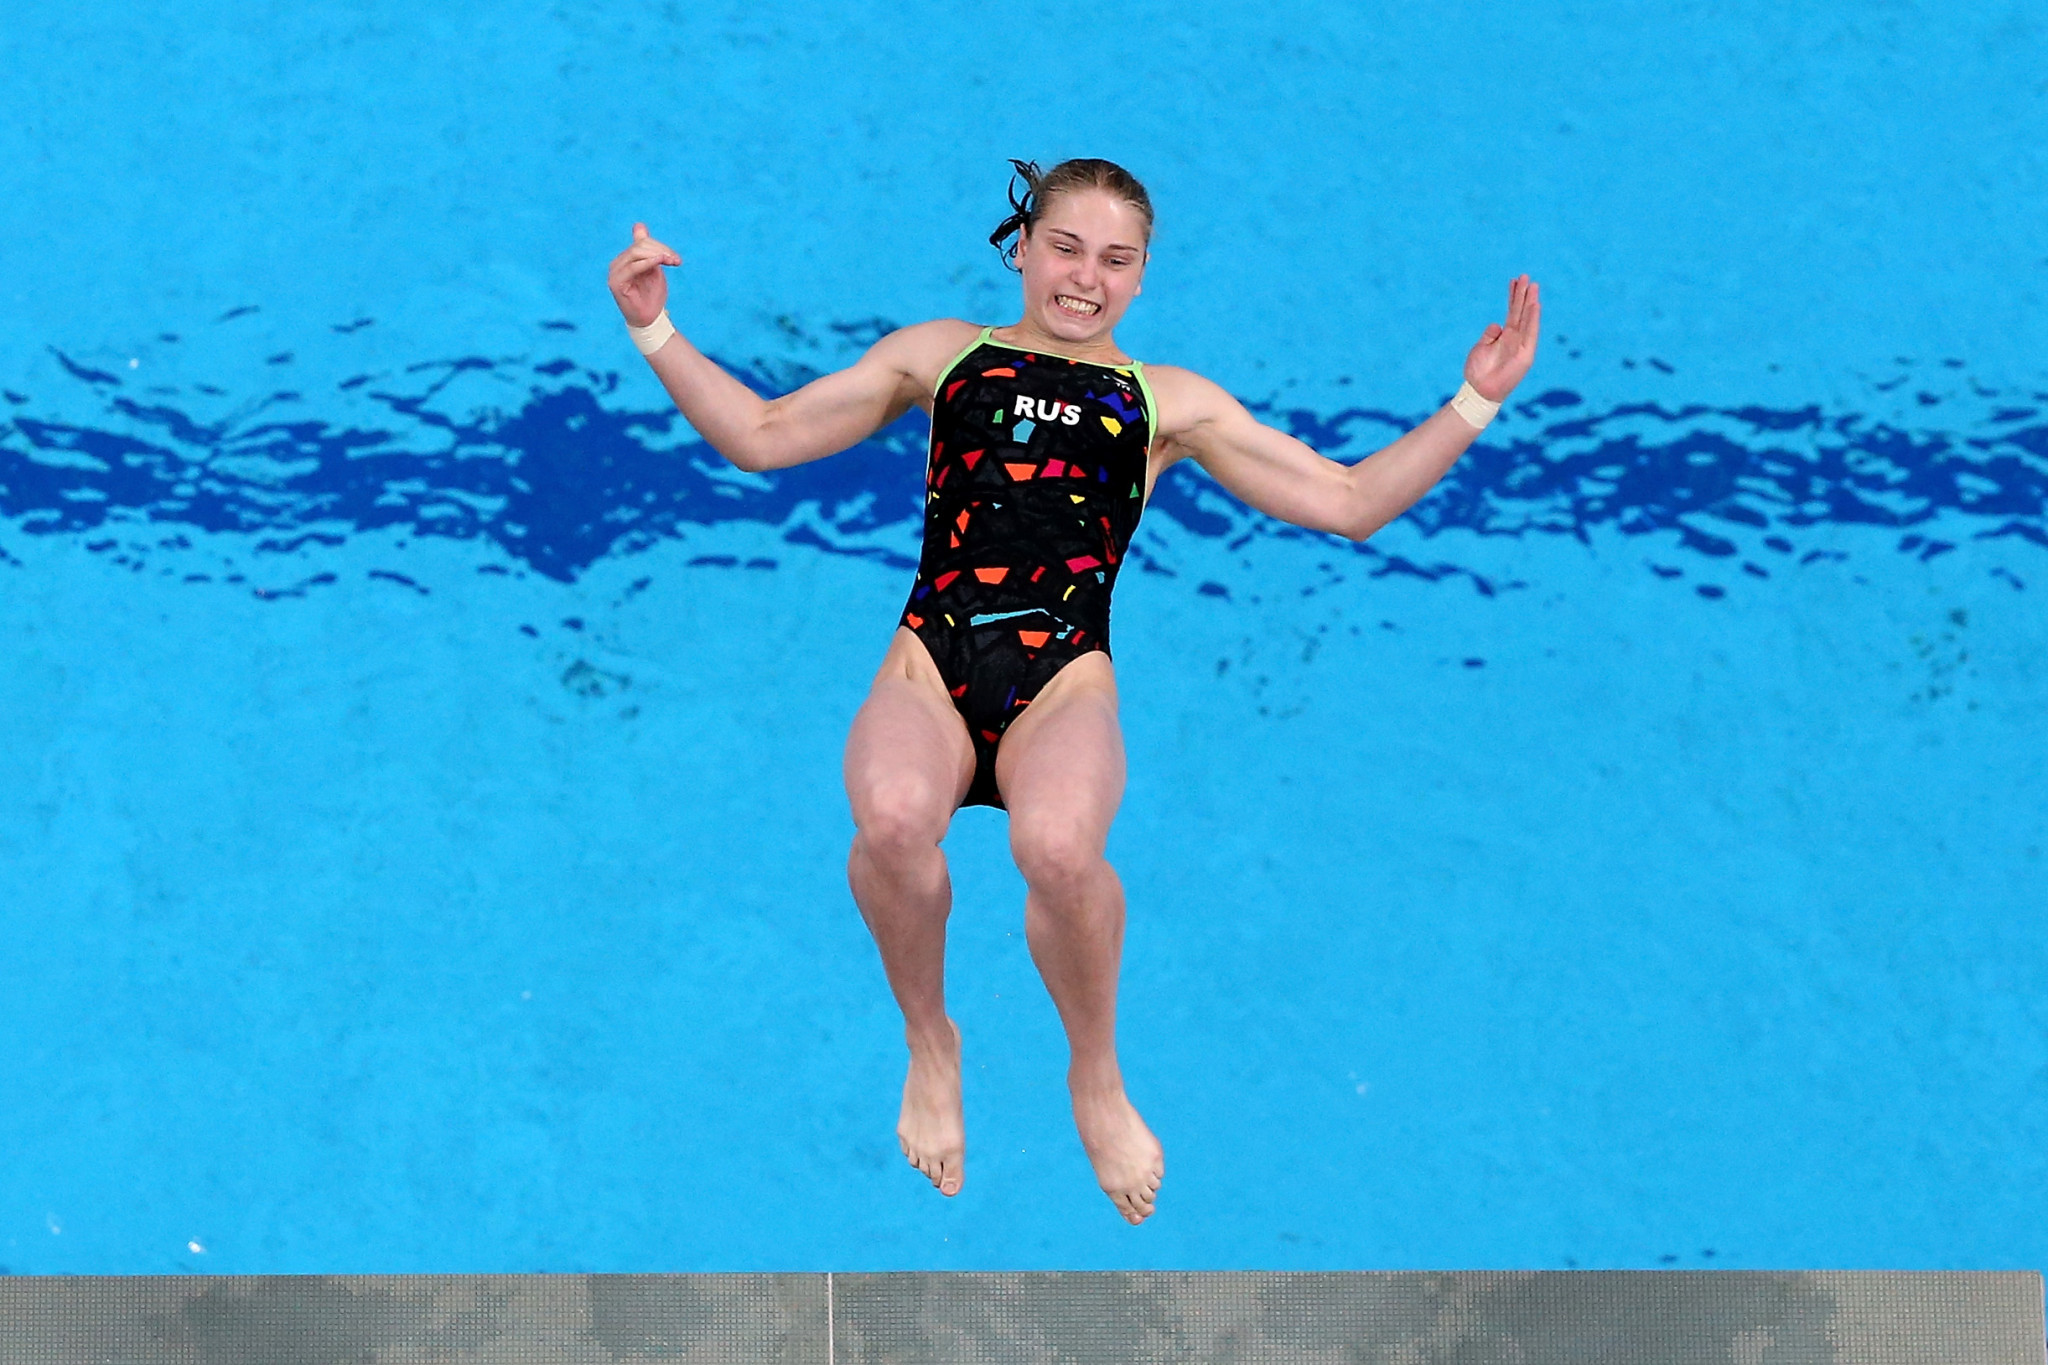 Anna Chuinyshena of Russia led the way in the women's 10m platform preliminary round ©Getty Images